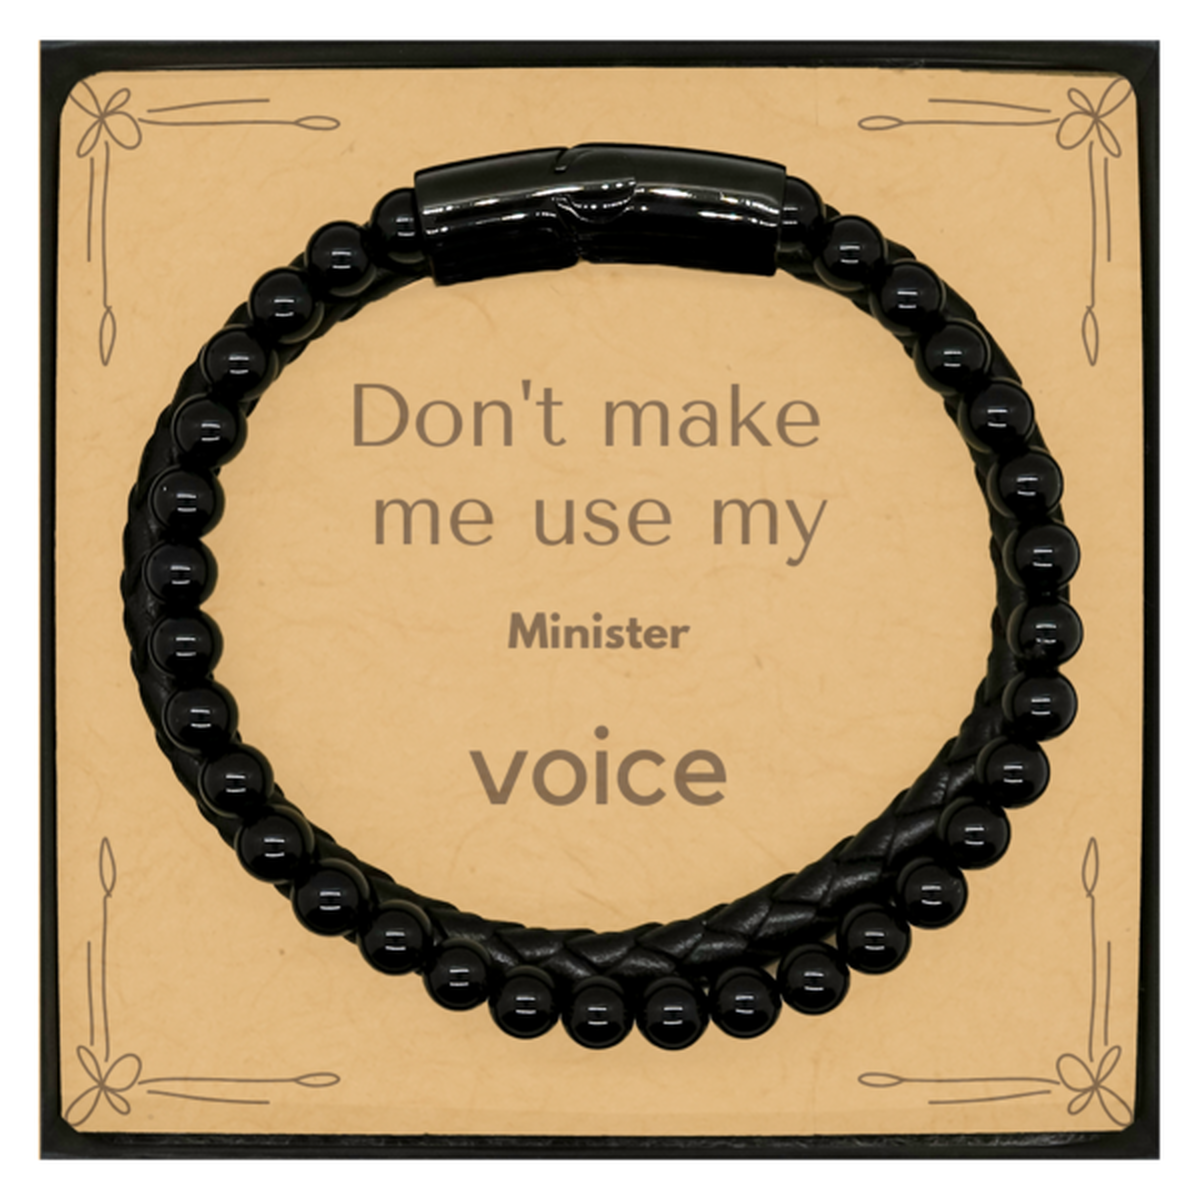 Don't make me use my Minister voice, Sarcasm Minister Card Gifts, Christmas Minister Stone Leather Bracelets Birthday Unique Gifts For Minister Coworkers, Men, Women, Colleague, Friends